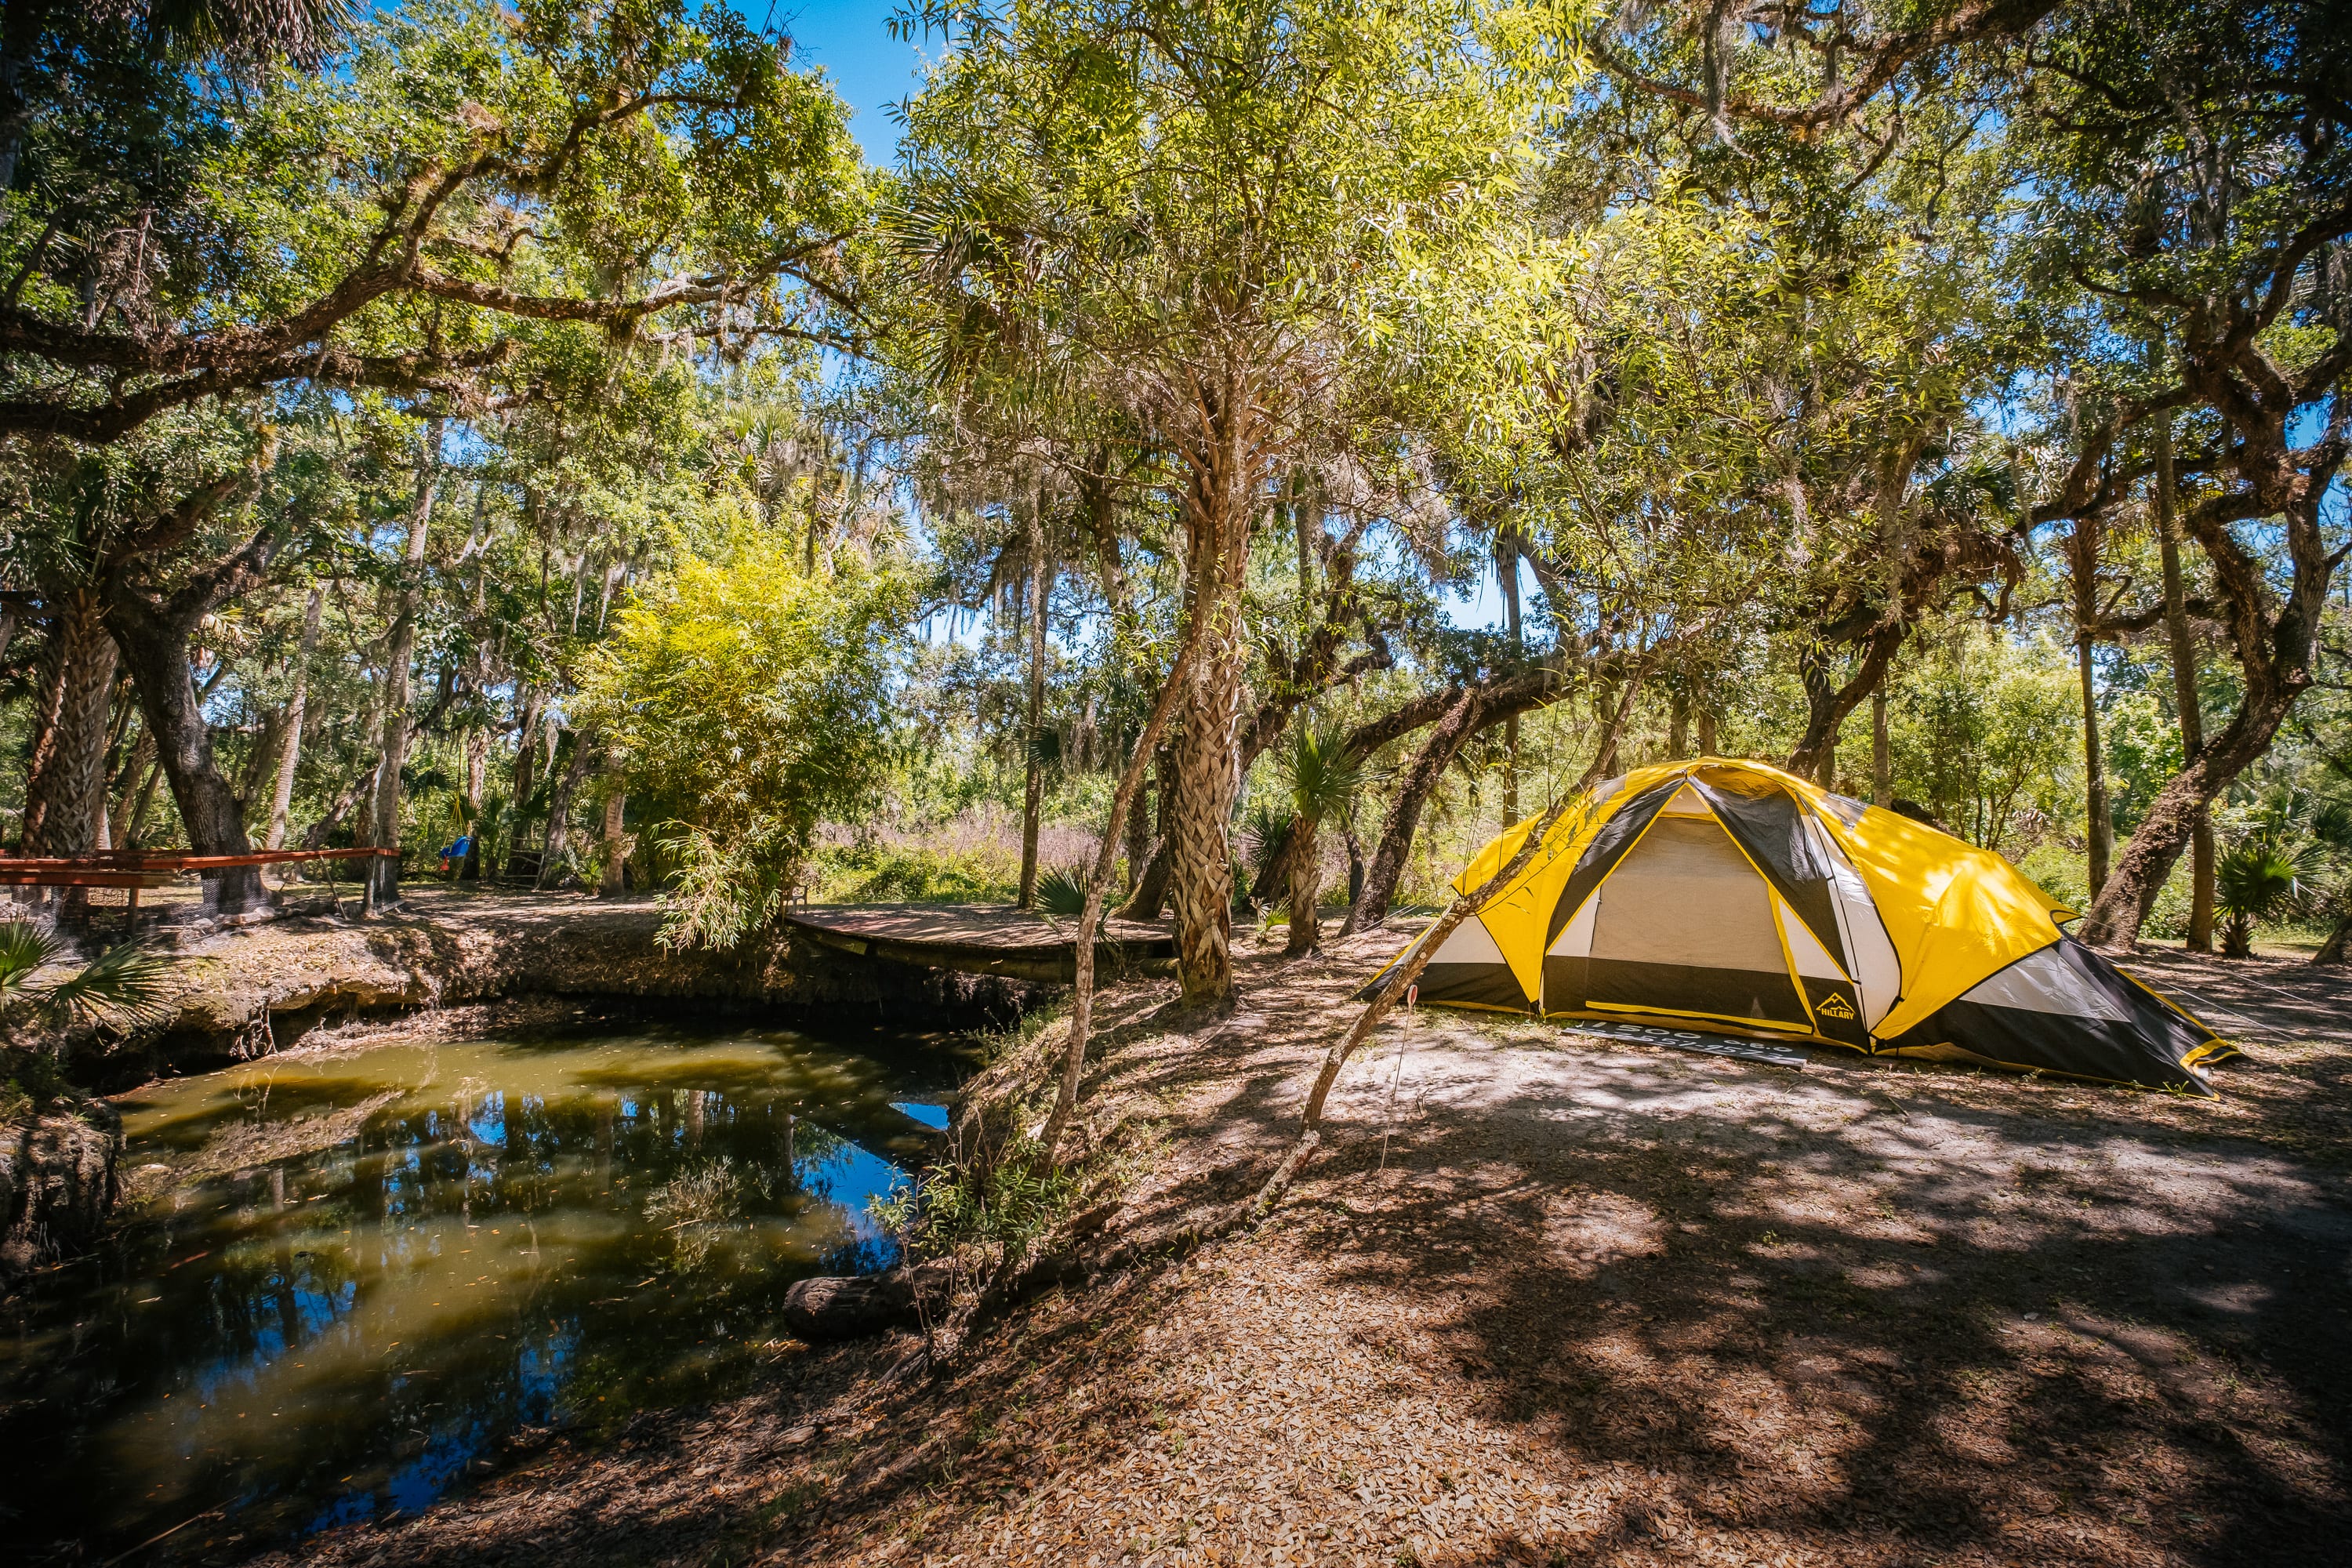 Tent camping near the pond